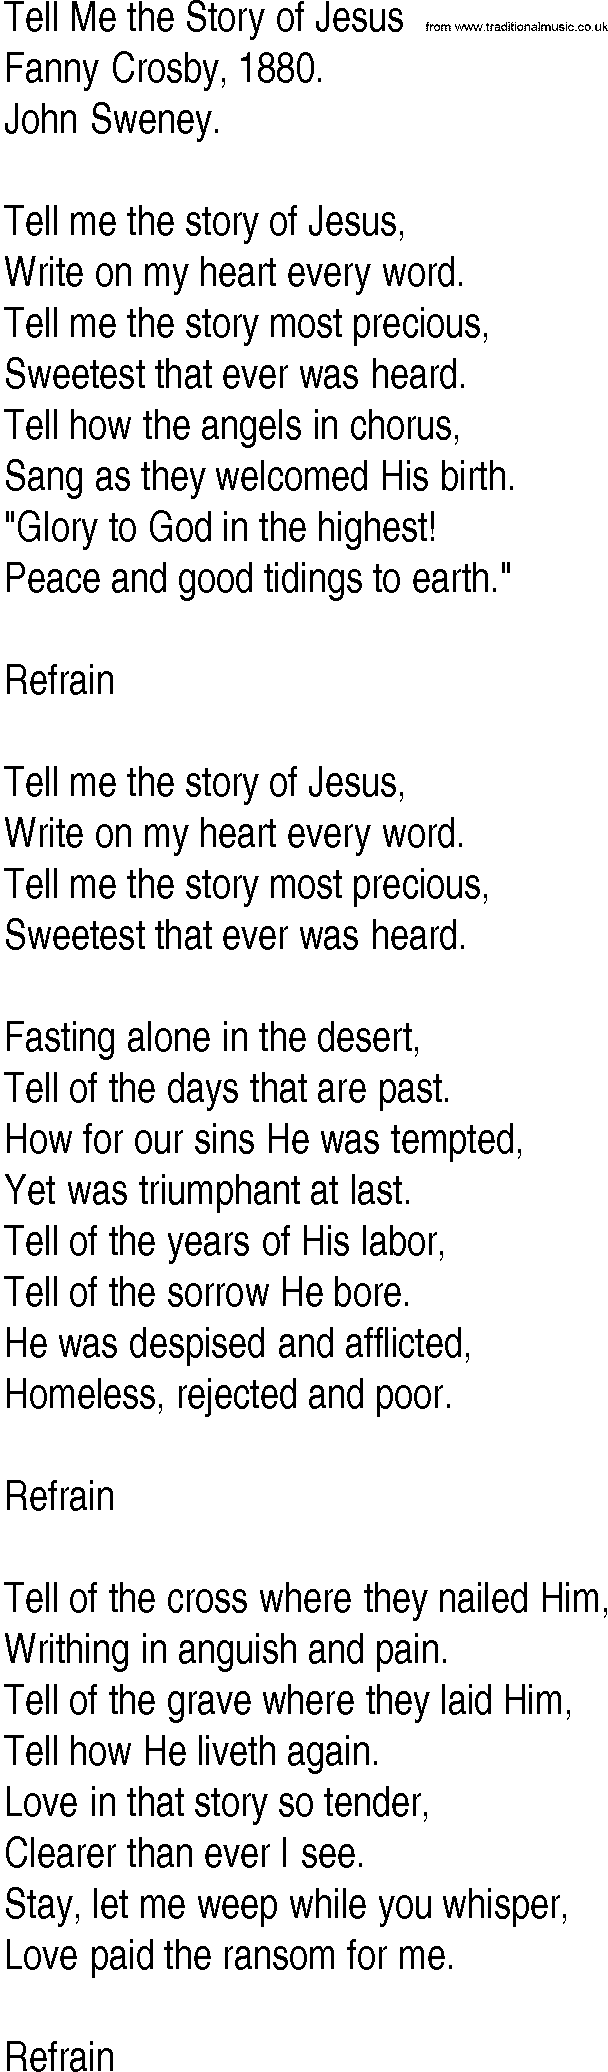 Hymn and Gospel Song: Tell Me the Story of Jesus by Fanny Crosby lyrics